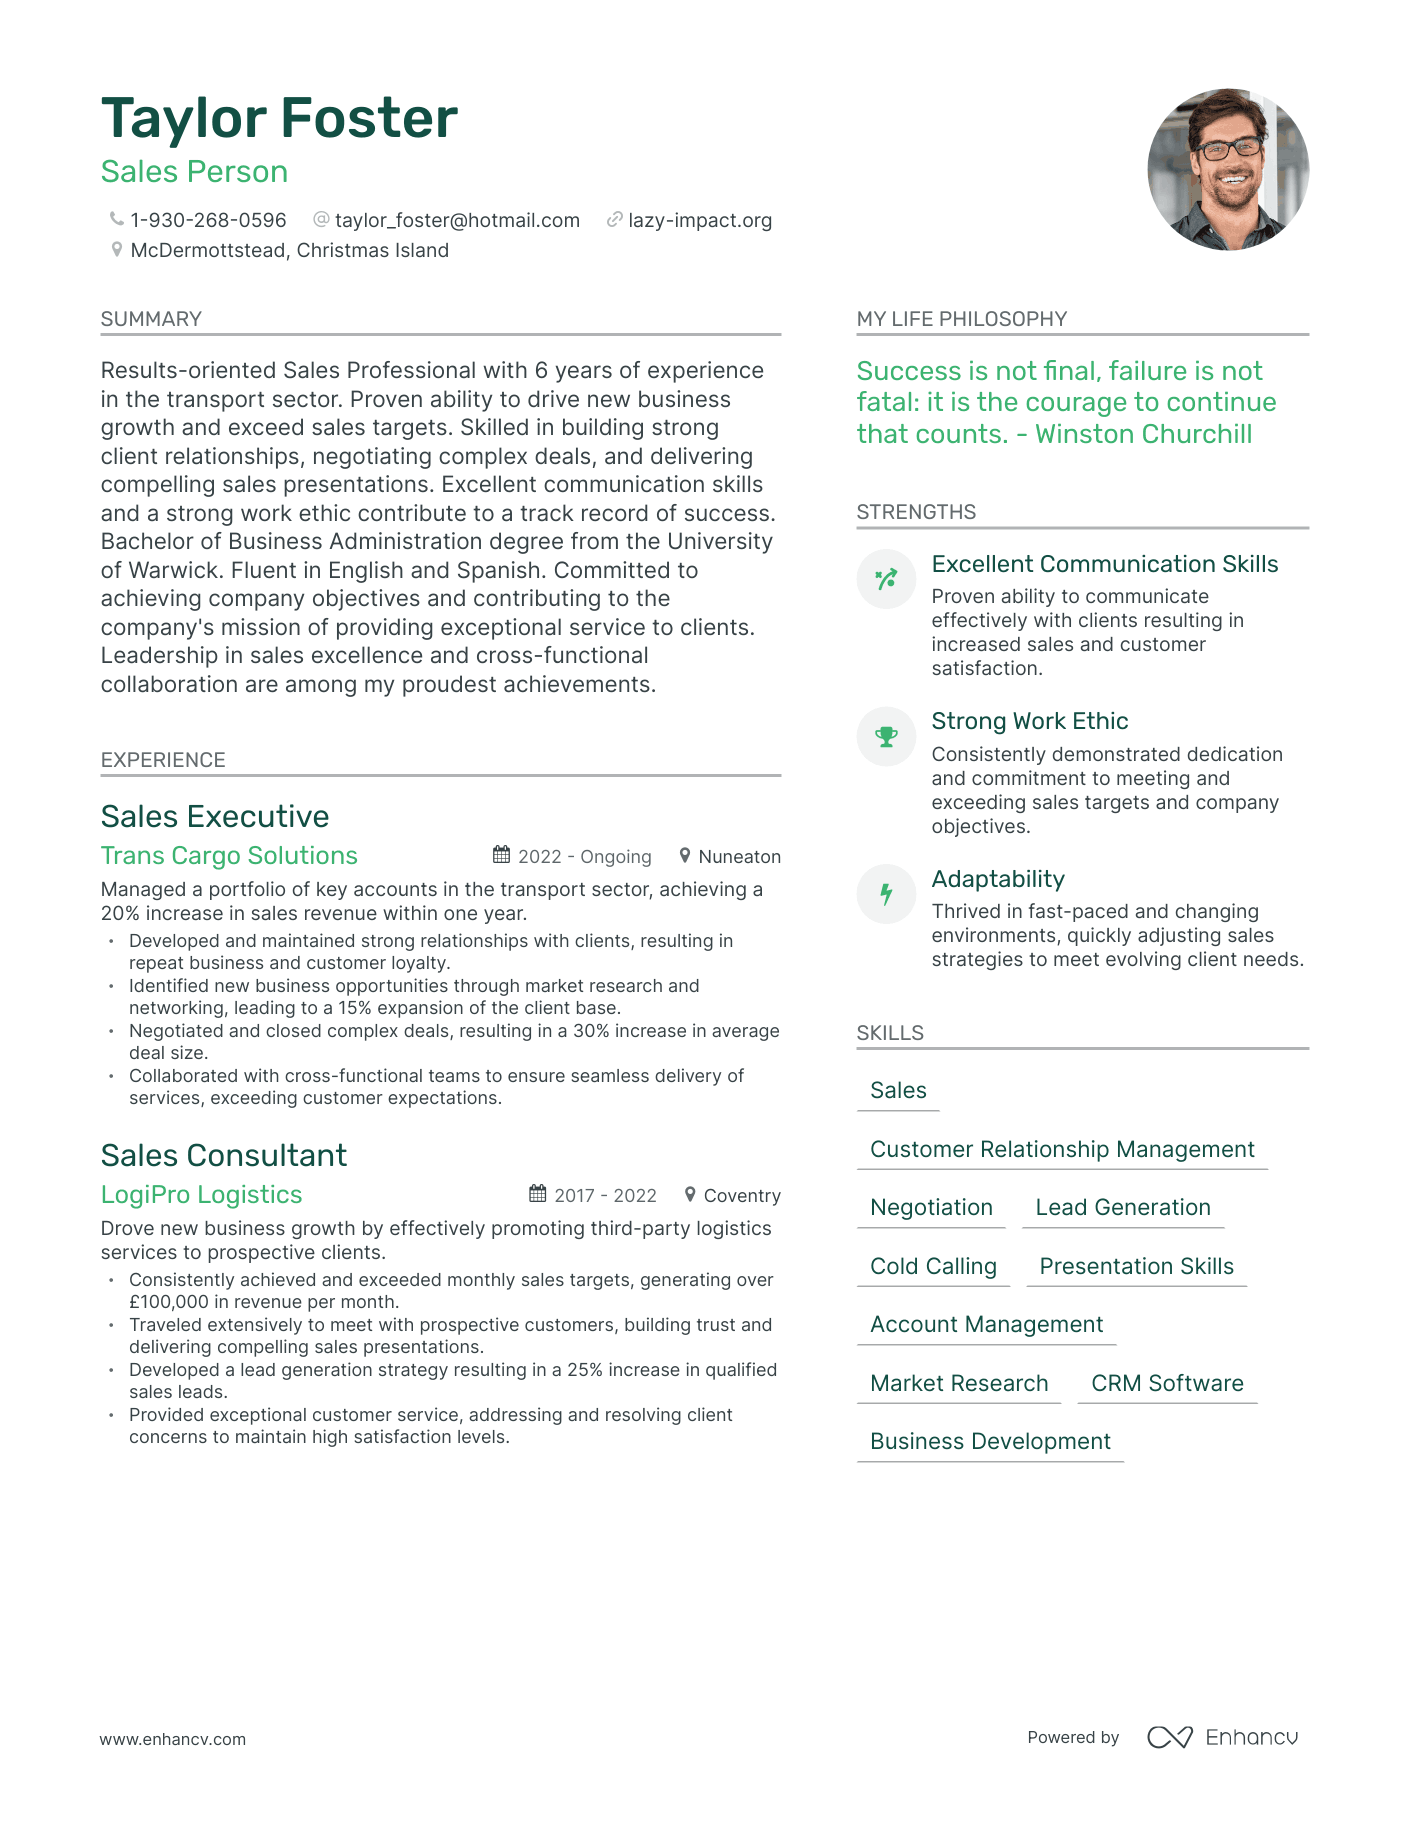 Sales Person resume example